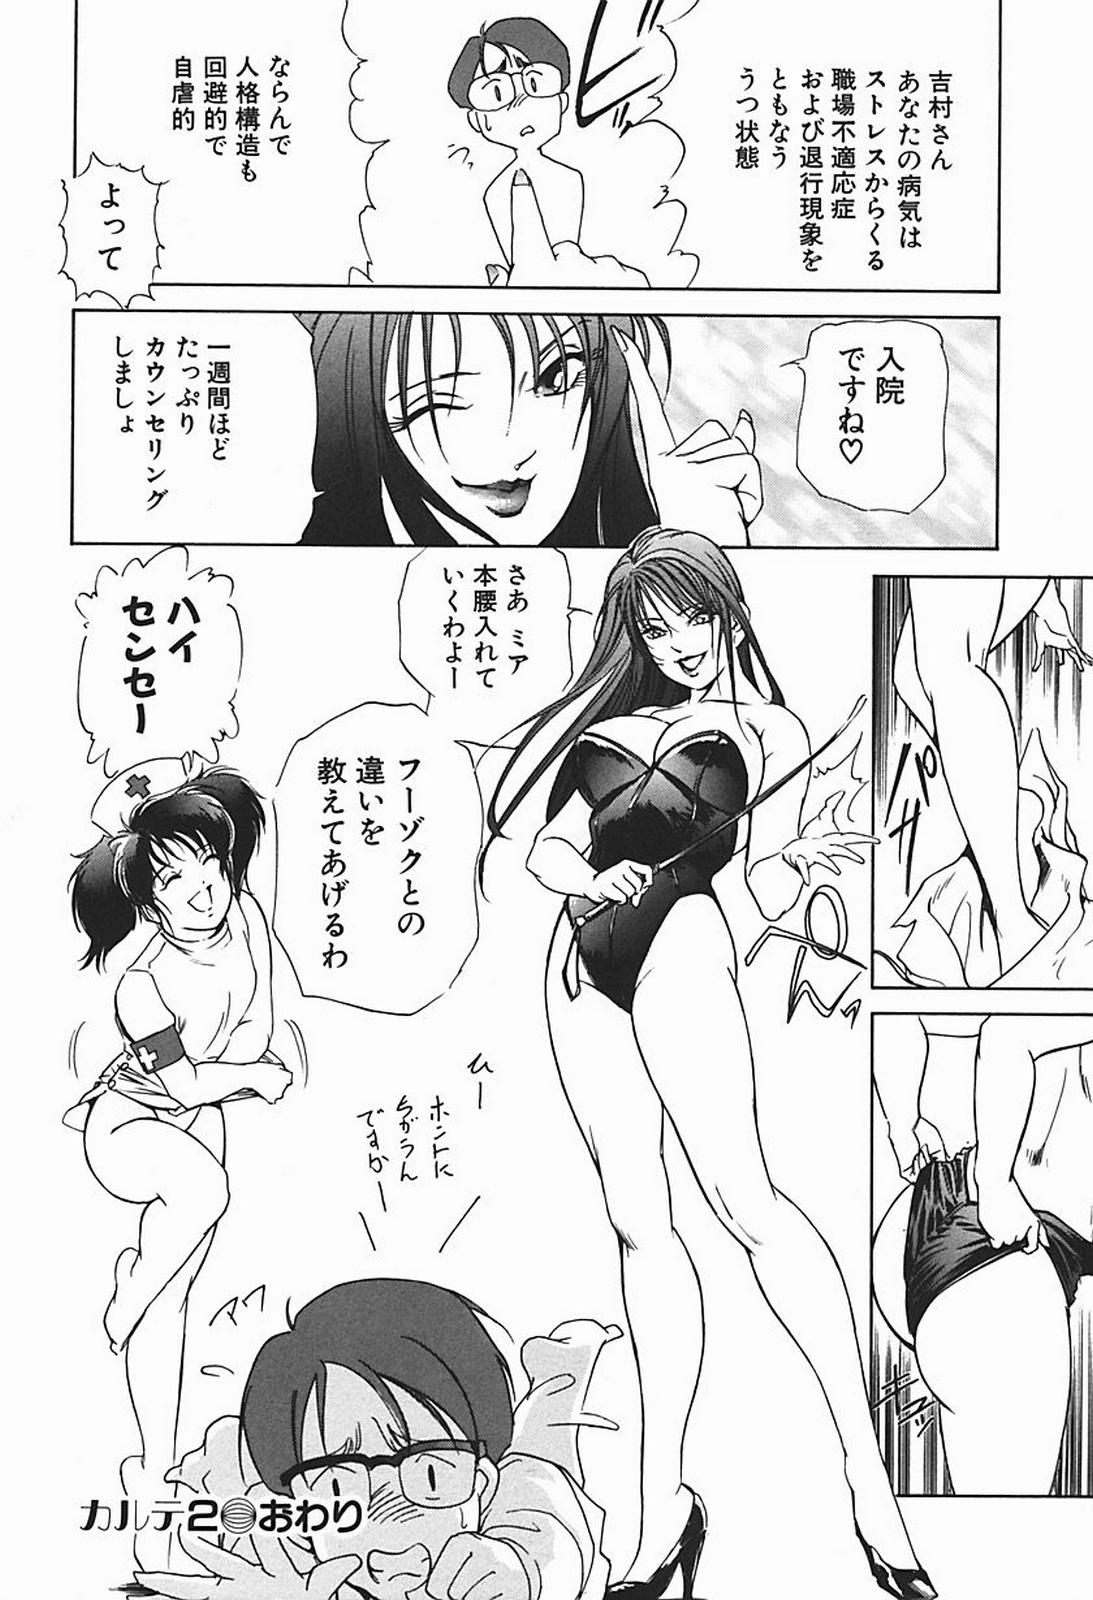 Body Therapy 48